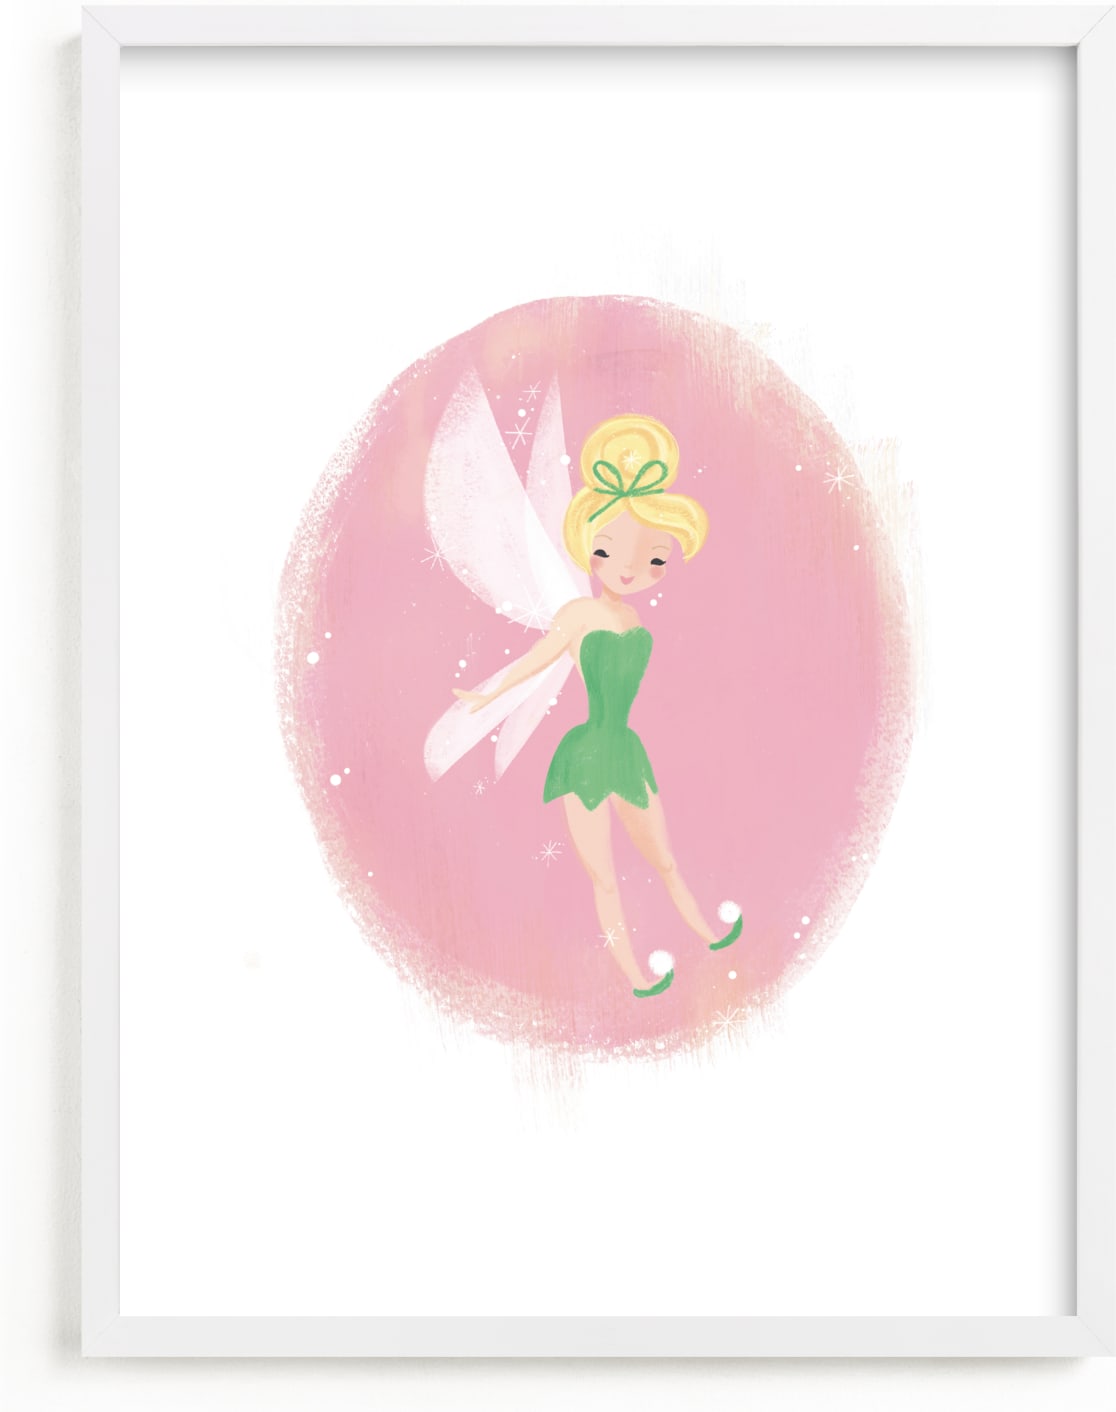 This is a pink disney art by Itsy Belle Studio called Disney's Tink Flies.